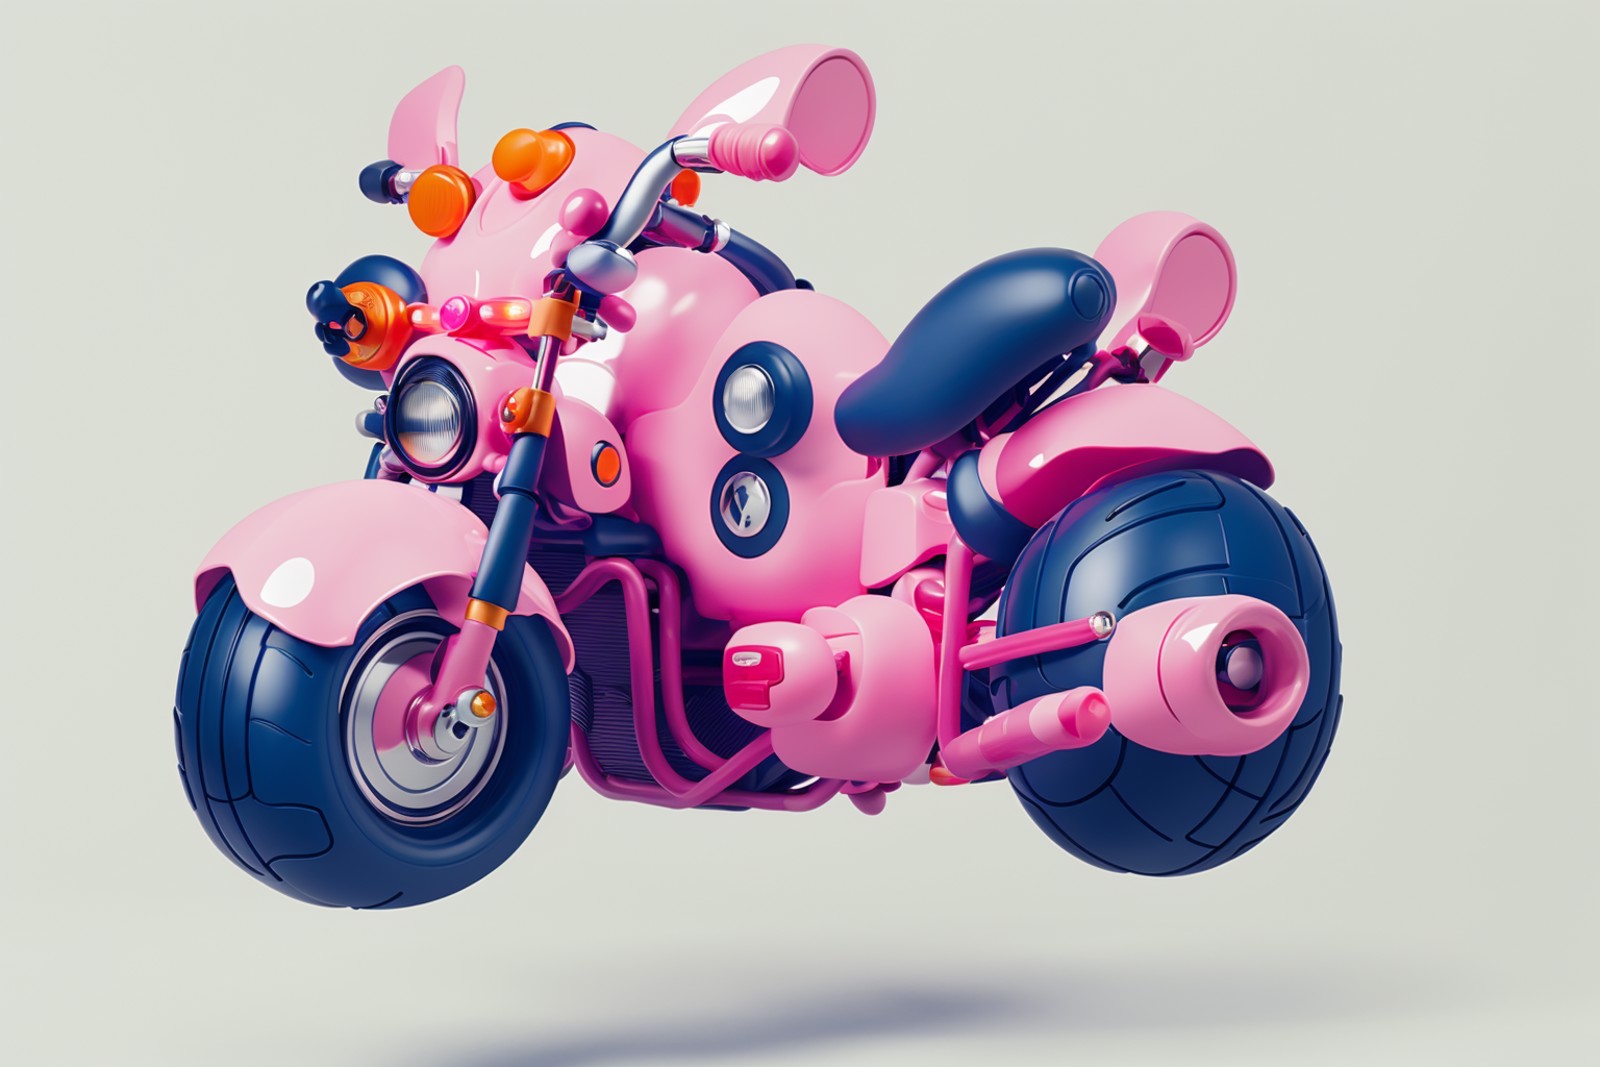 08374-3717507179-((masterpiece, best quality))，A cute pink pig-like motorbike flying in the air with a white background.png